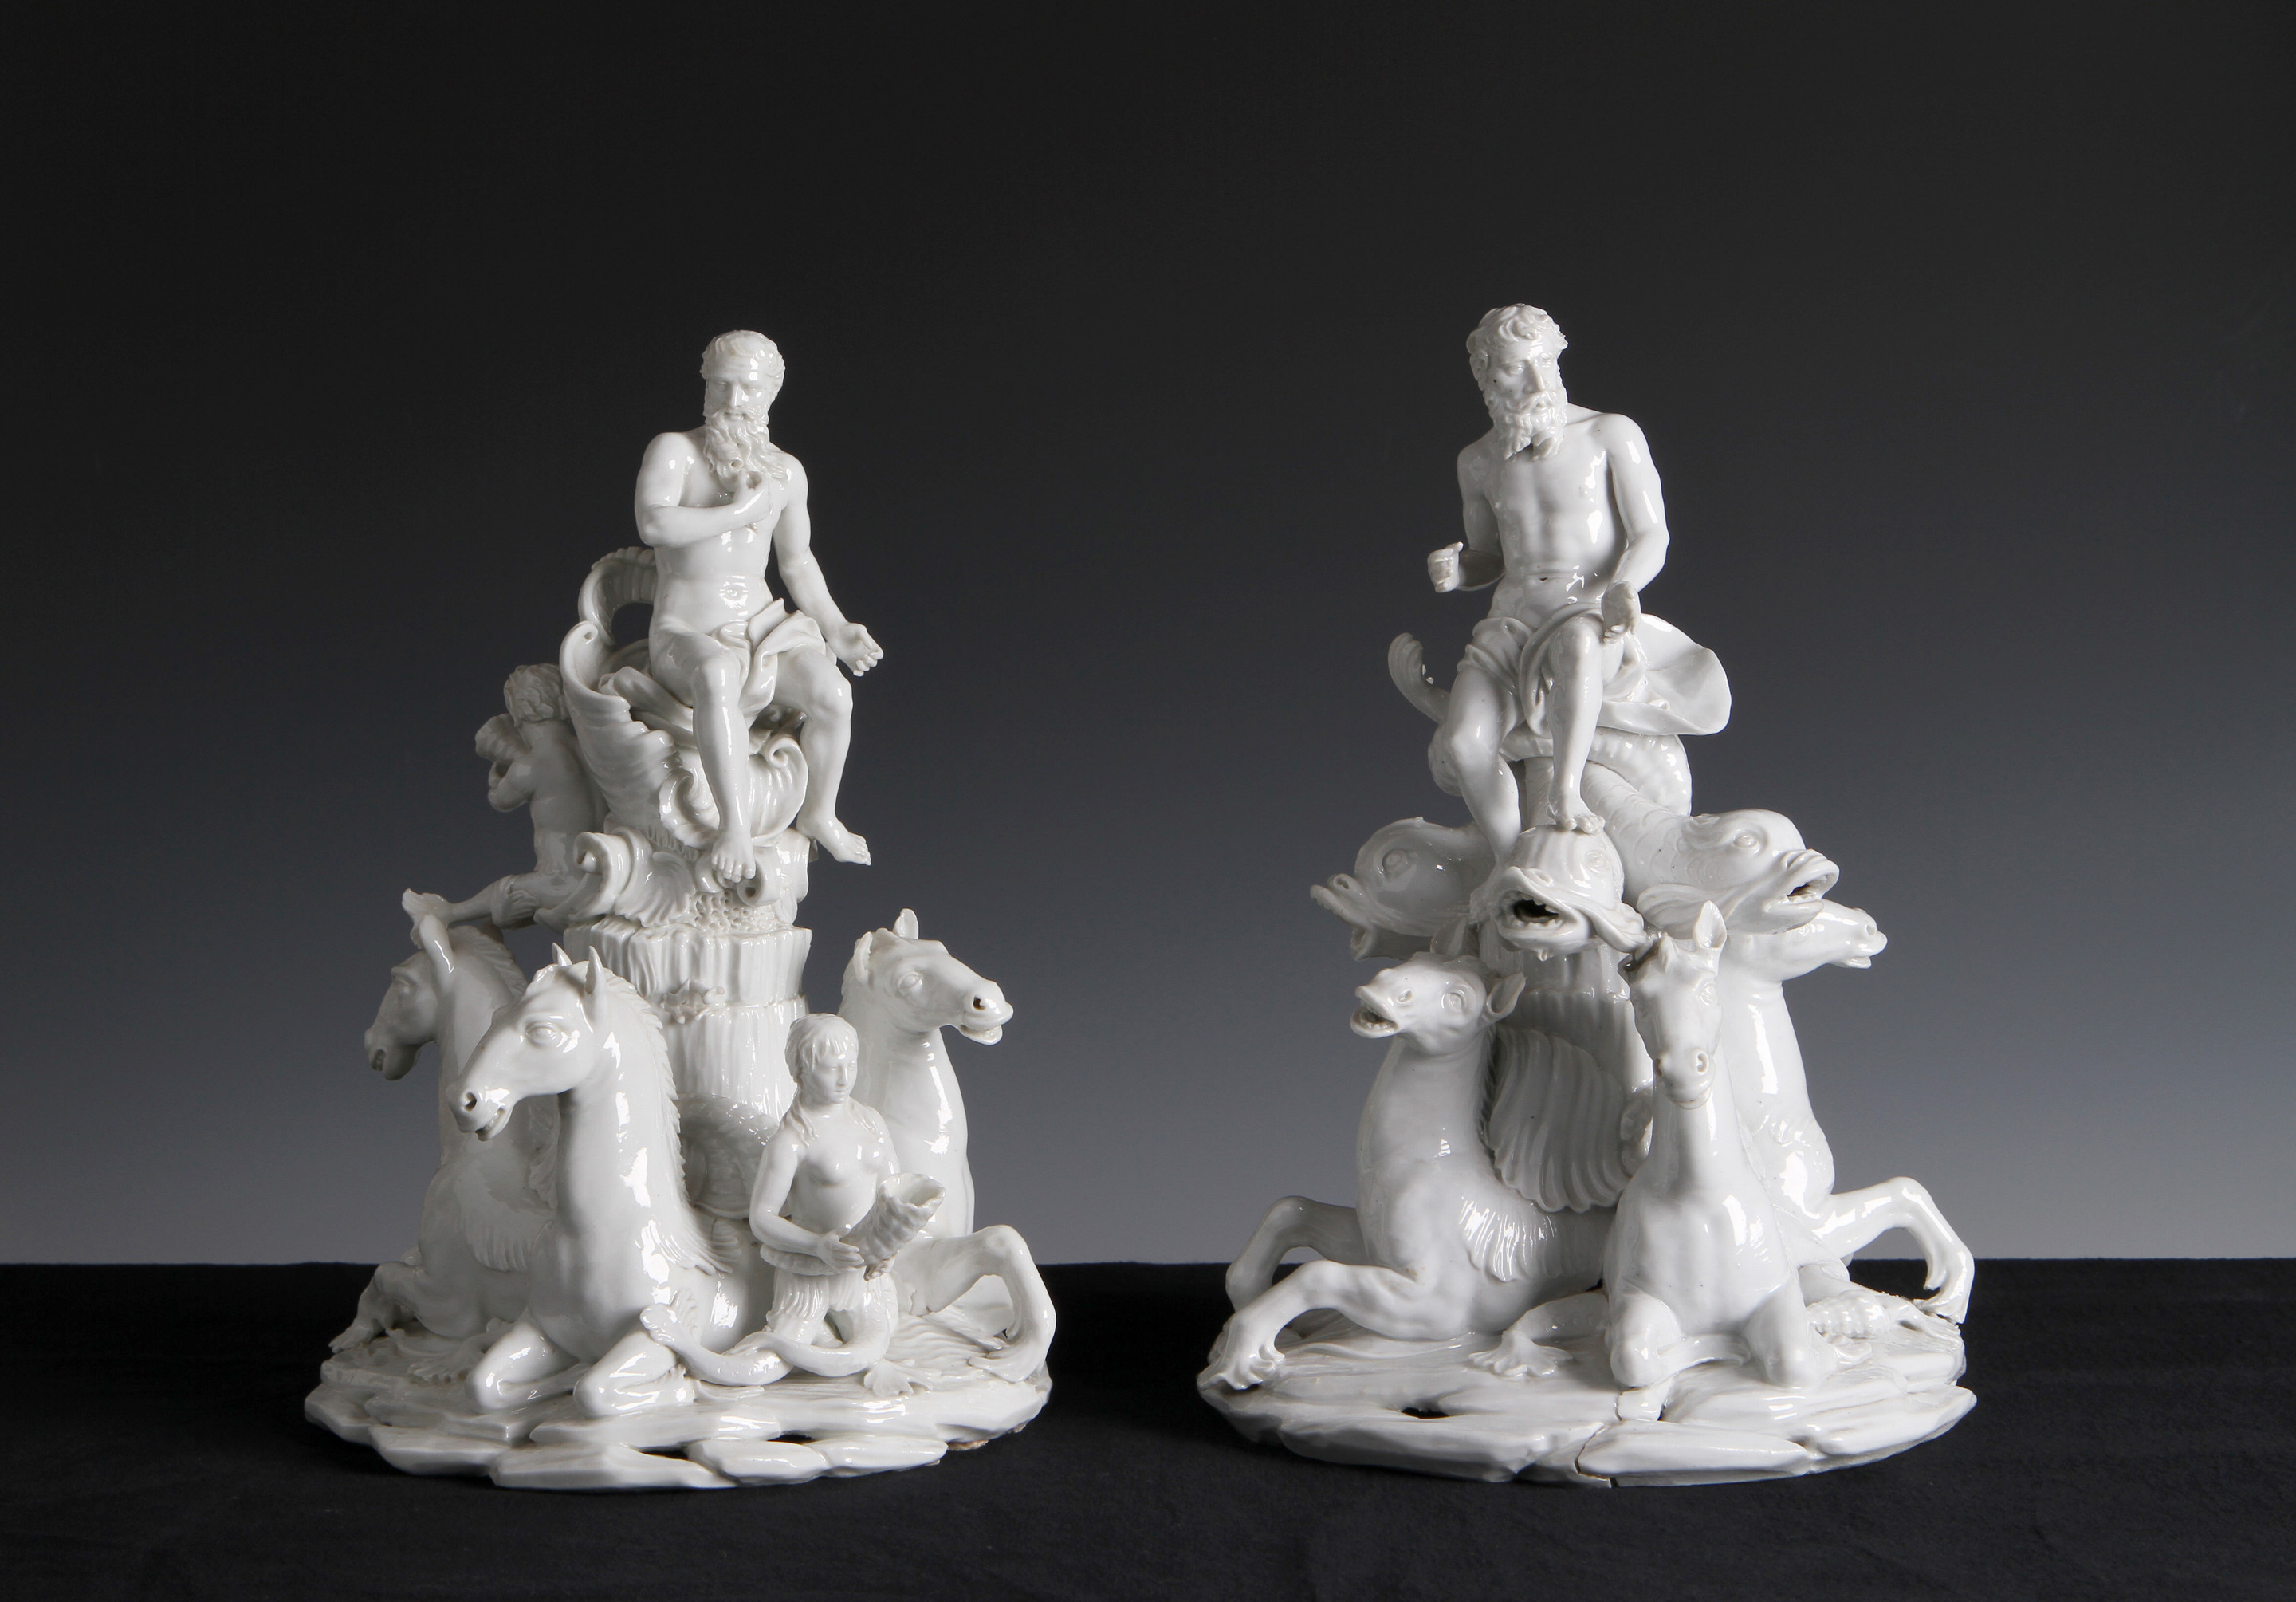 An Exceptional and Unrecorded Pair of Cozzi white porcelain groups representing the Triumph of Neptune